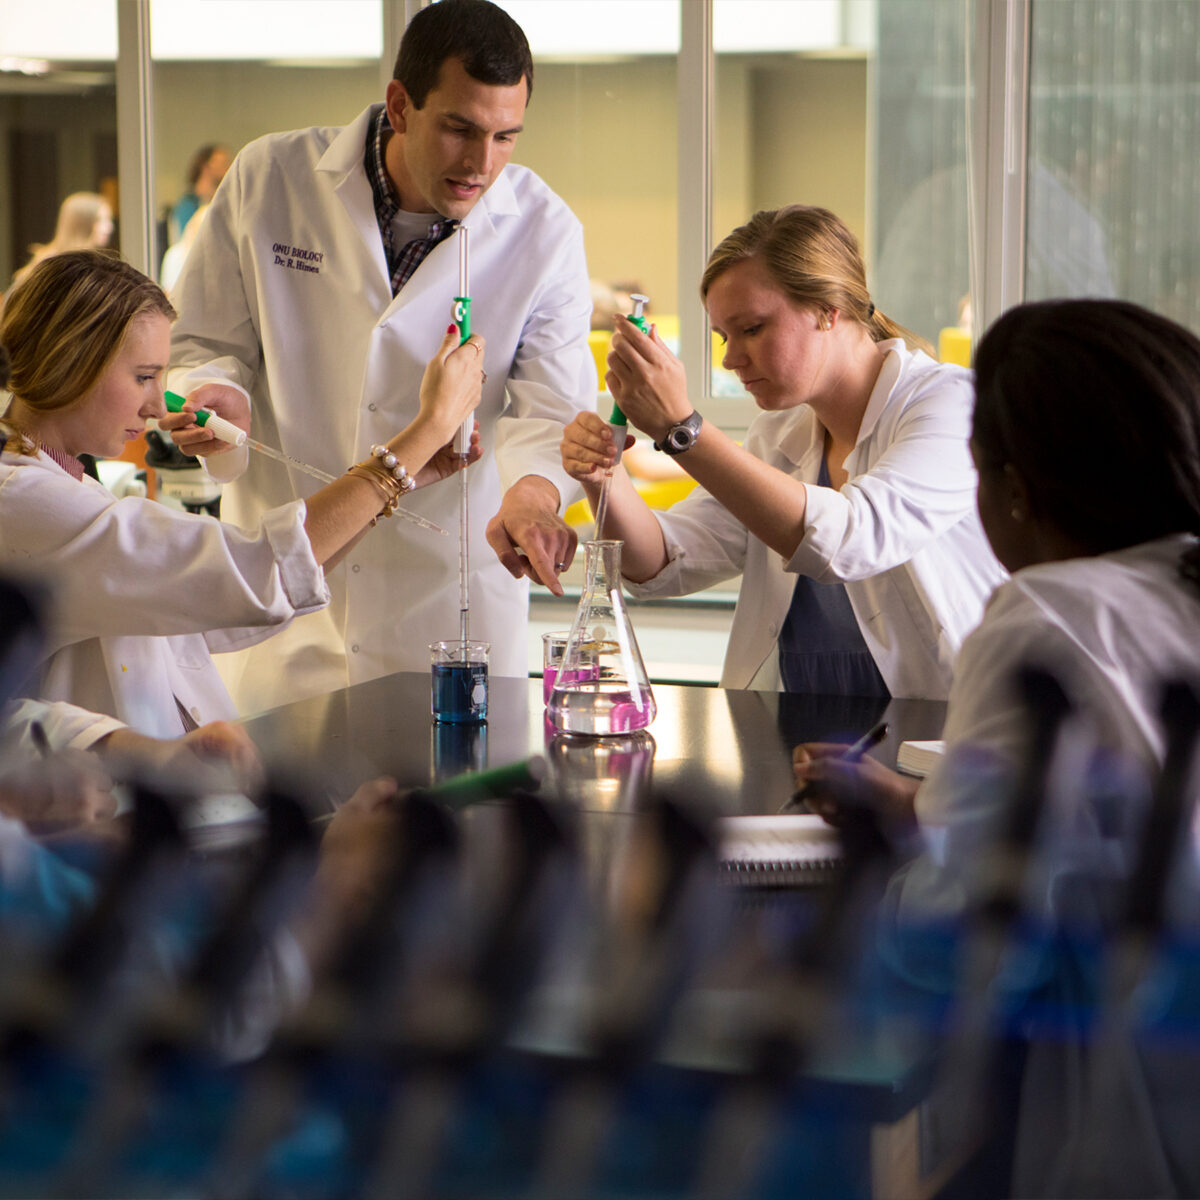 Professor and group of students conducting an experiment